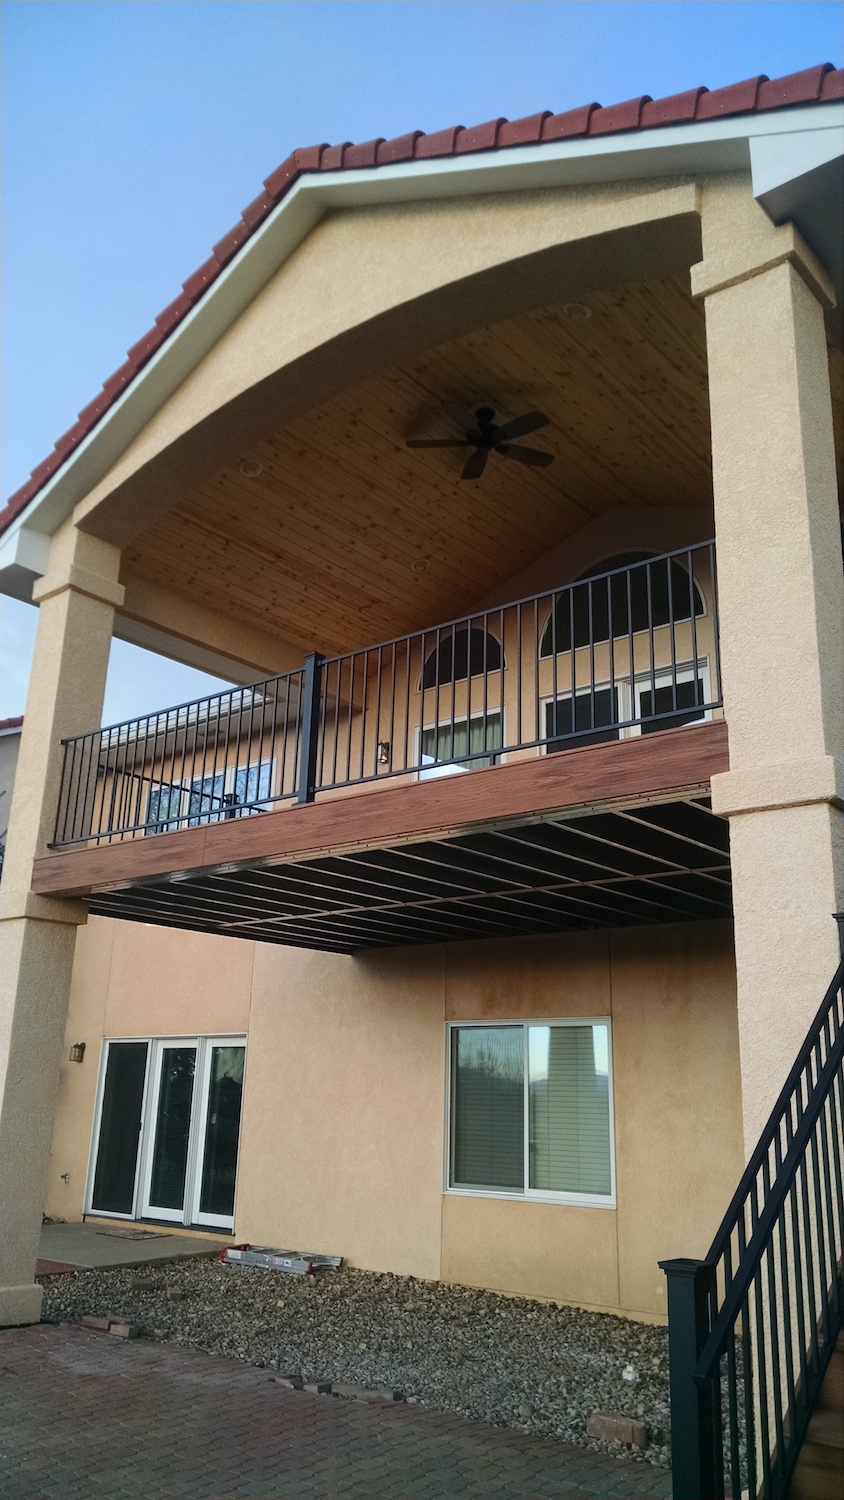 Steel deck framing supports an elevated composite deck with gabled deck cover